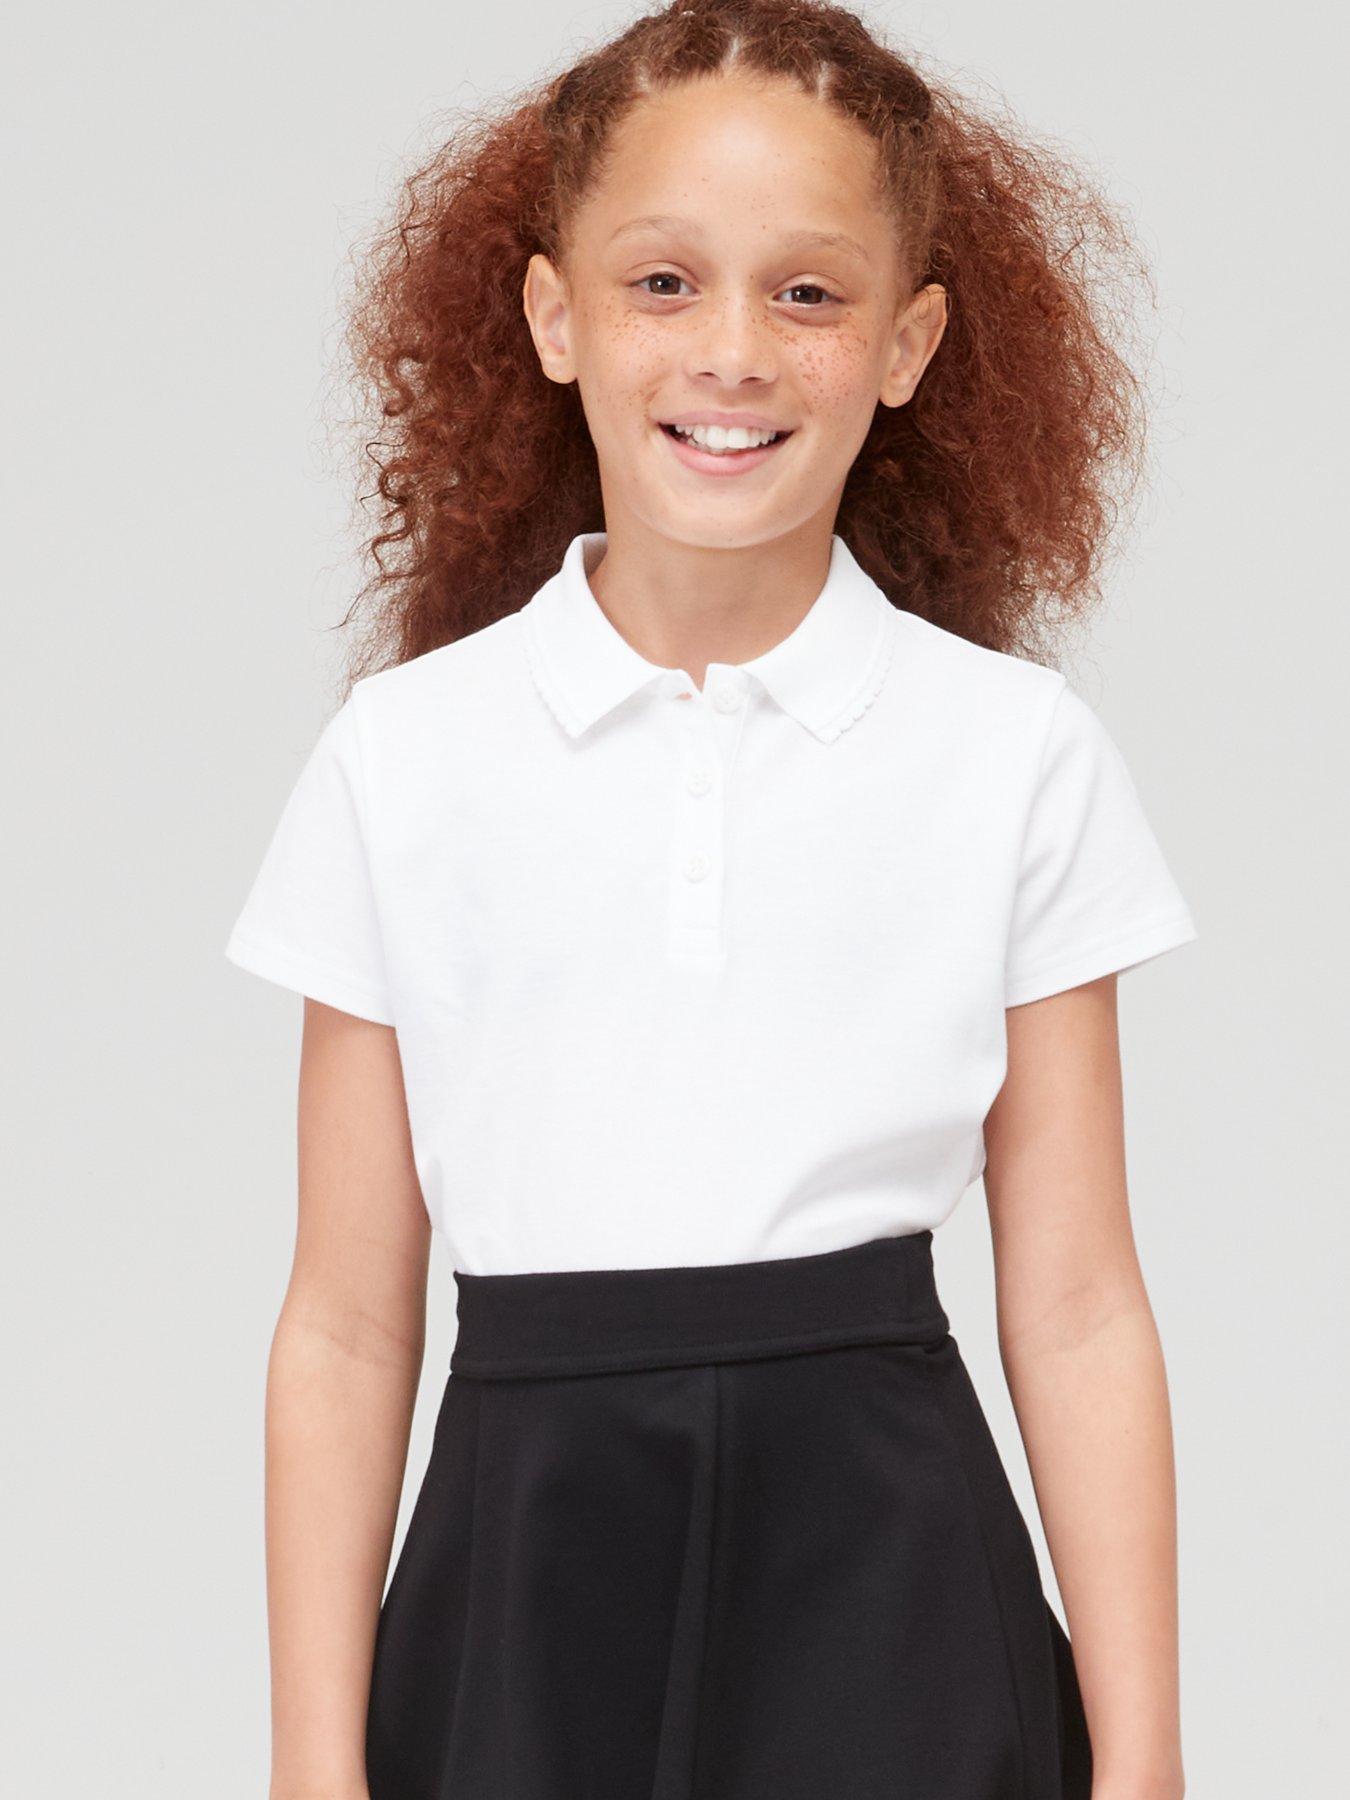 Everyday Girls 5 Pack School Polo Tops - White